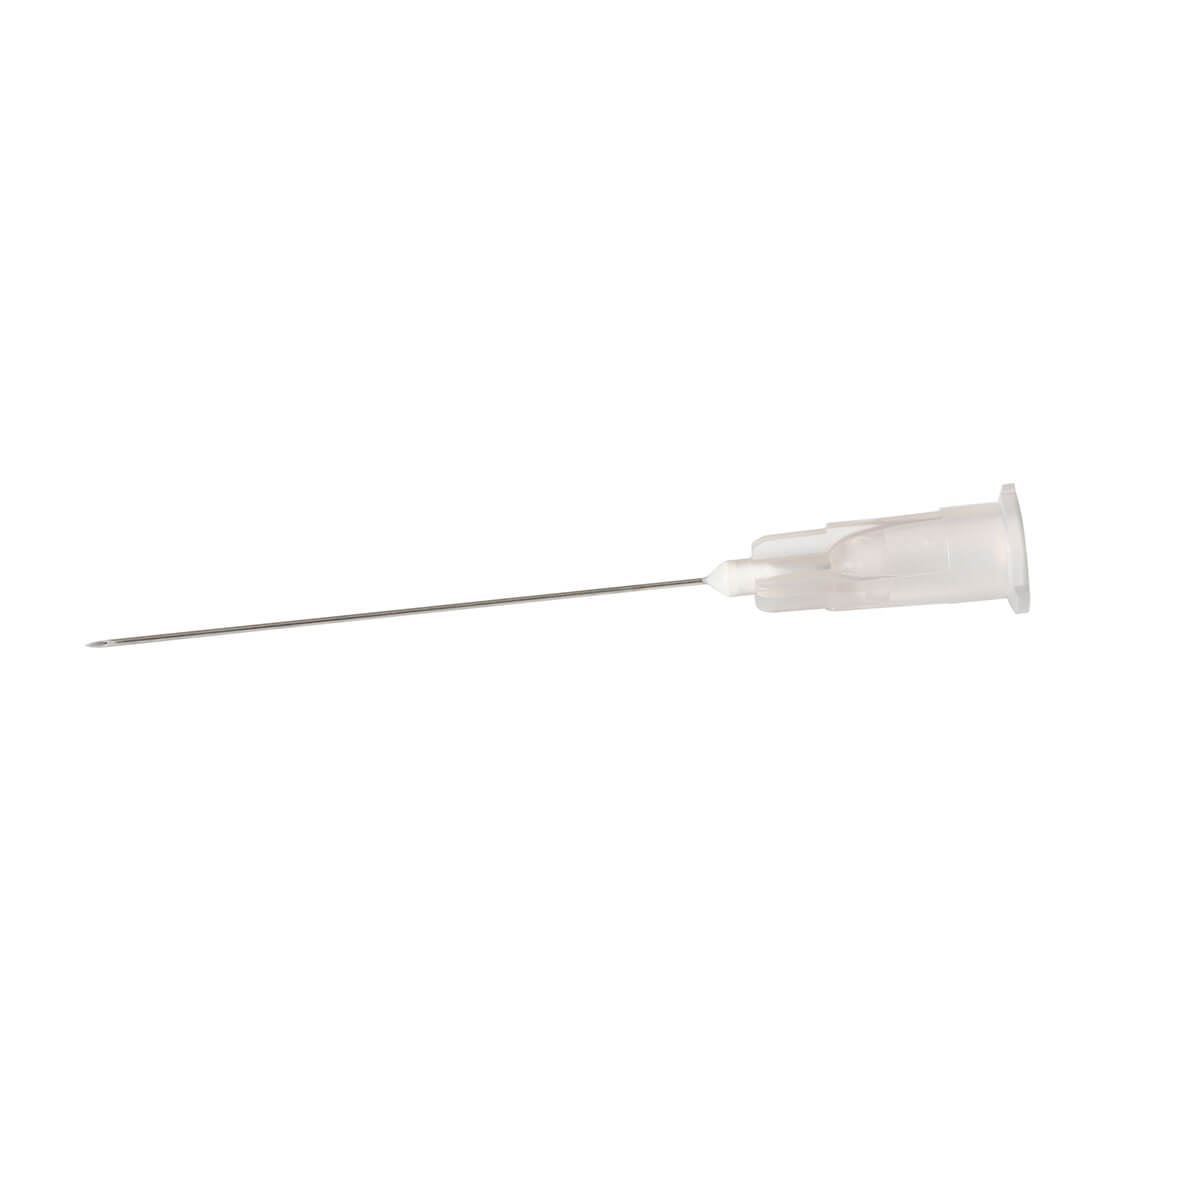 Neopoint Needle Grey 27G 40MM